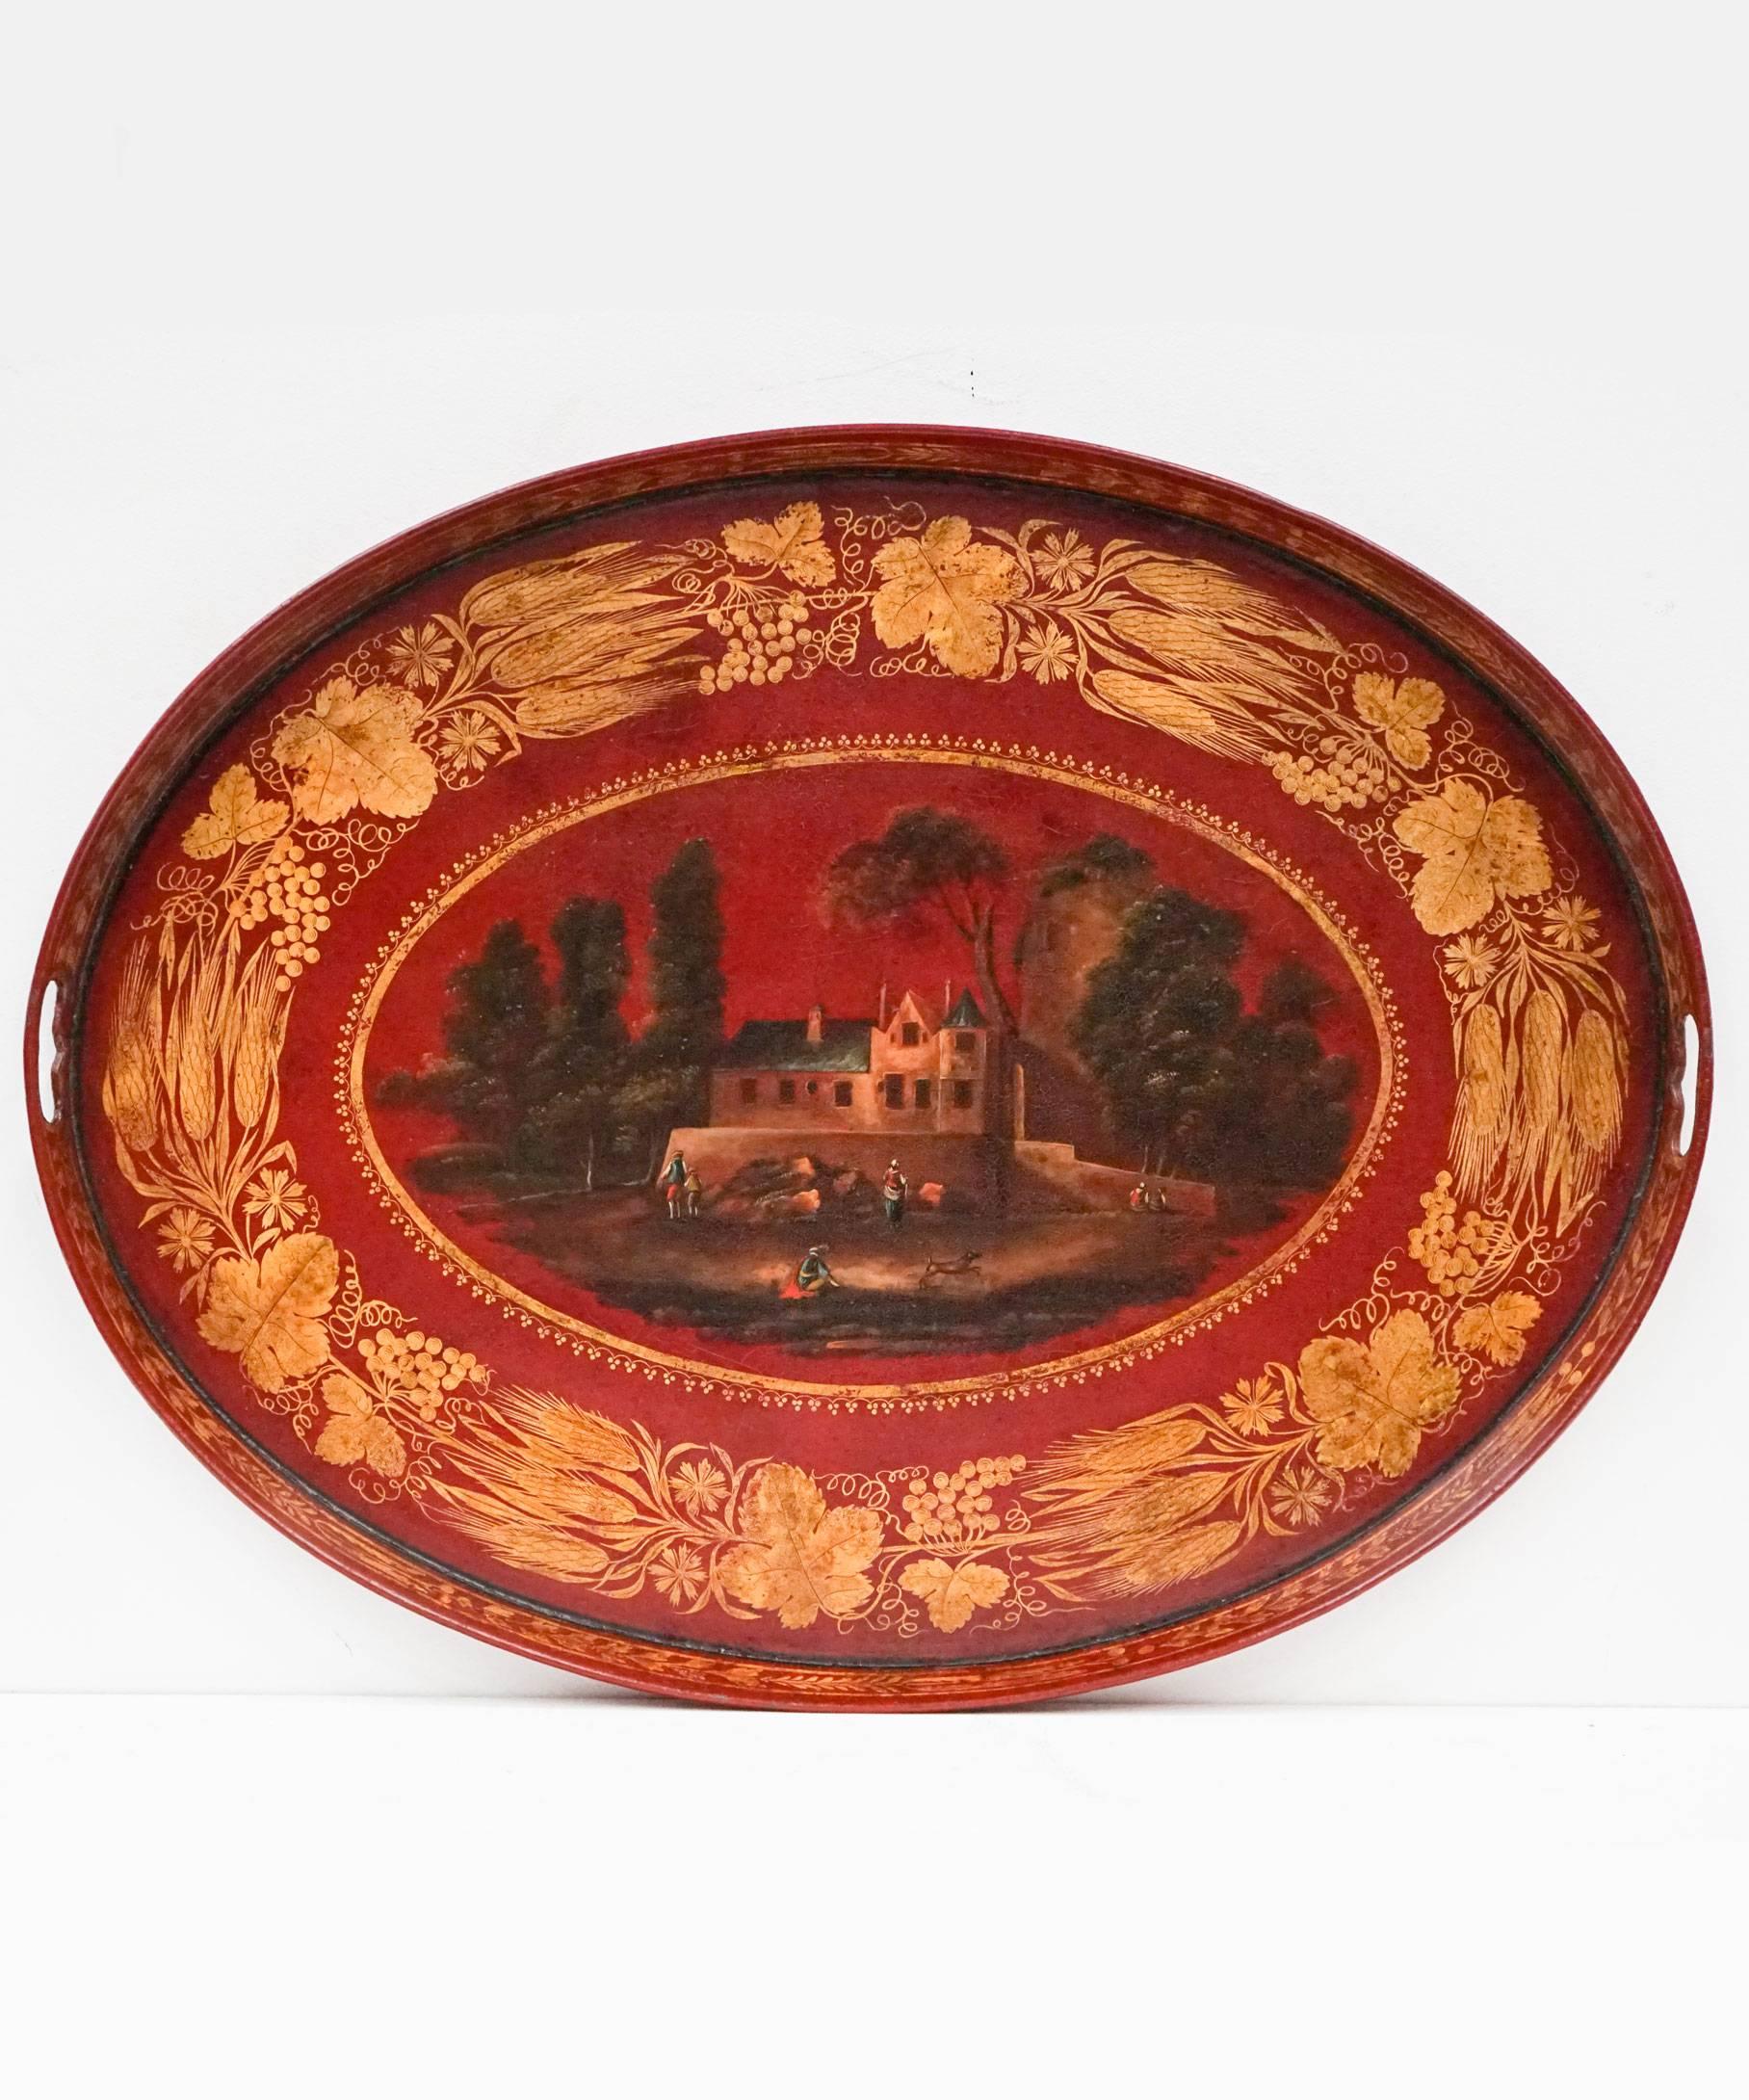 An extremely decorative French, 19th century scarlet toleware tray on a bespoke stand; the toleware tray painted in scarlet red and decorated in gilt with a bold border of vine leaves and wheat ears encircling a village scene raised on a